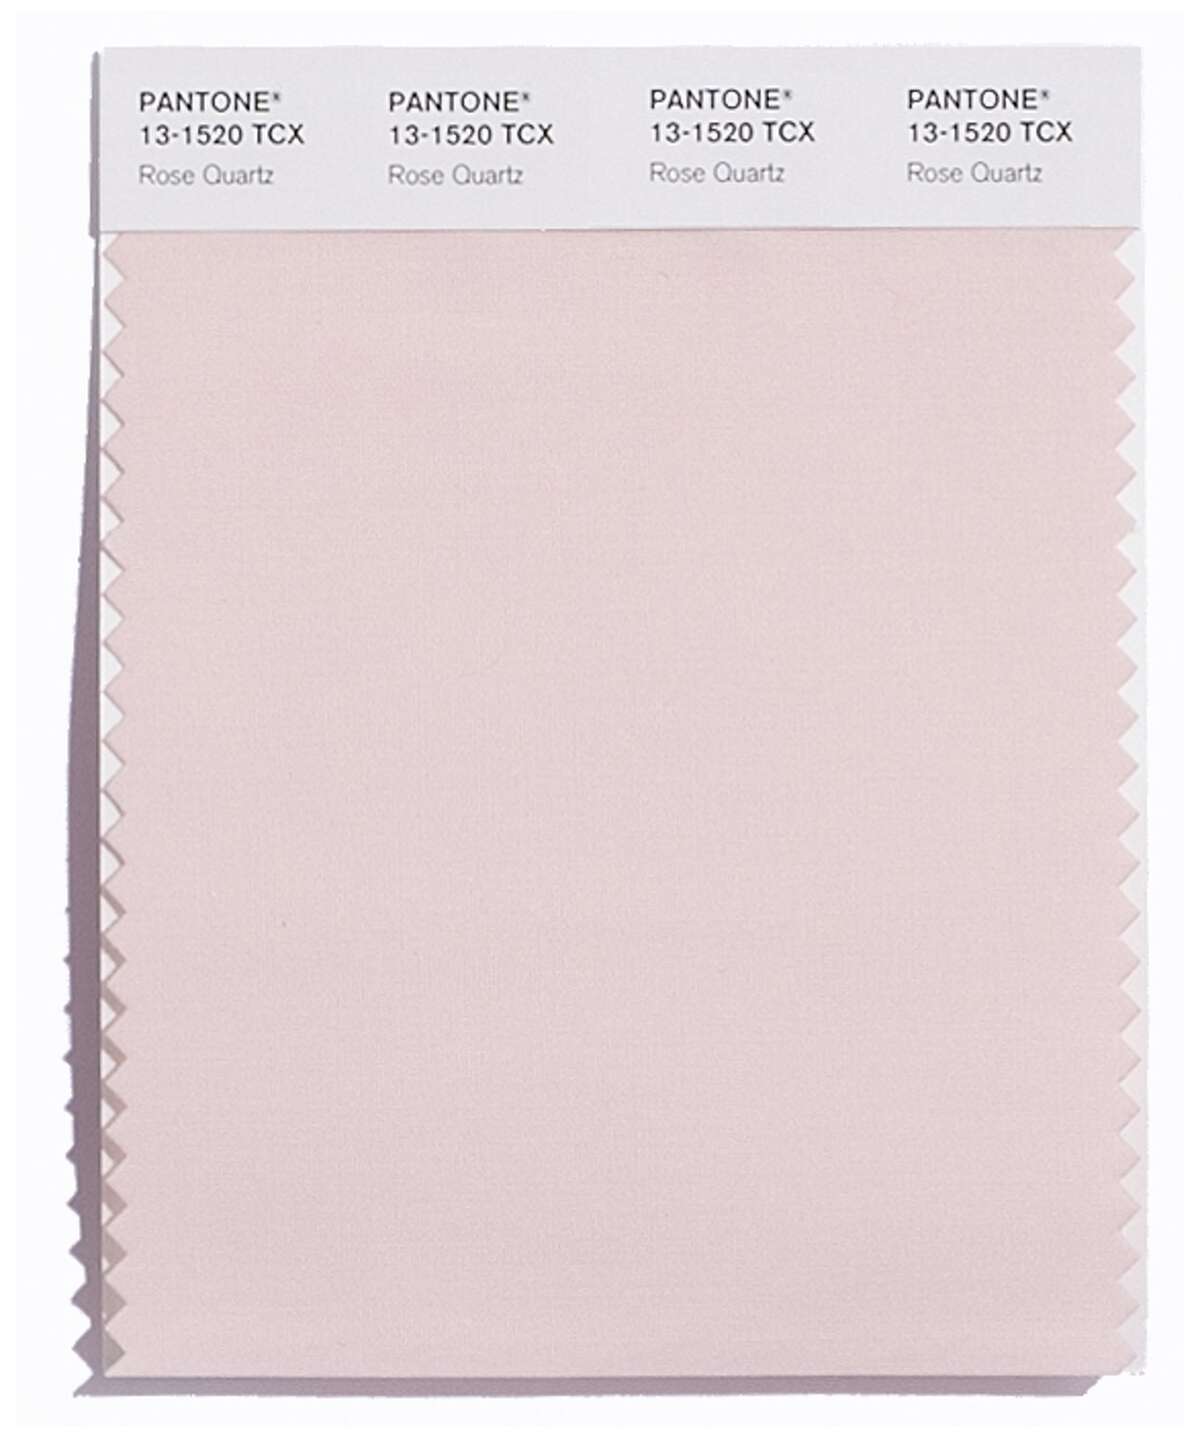 2016: Rose Quartz This color swatch image released by Pantone shows a shade of pink, called Rose Quartz. The experts at the Pantone Color Institute have chosen two colors of the year, Rose Quartz, a pale pink and Serenity, a shade that is closer to baby blue. (Pantone via AP)